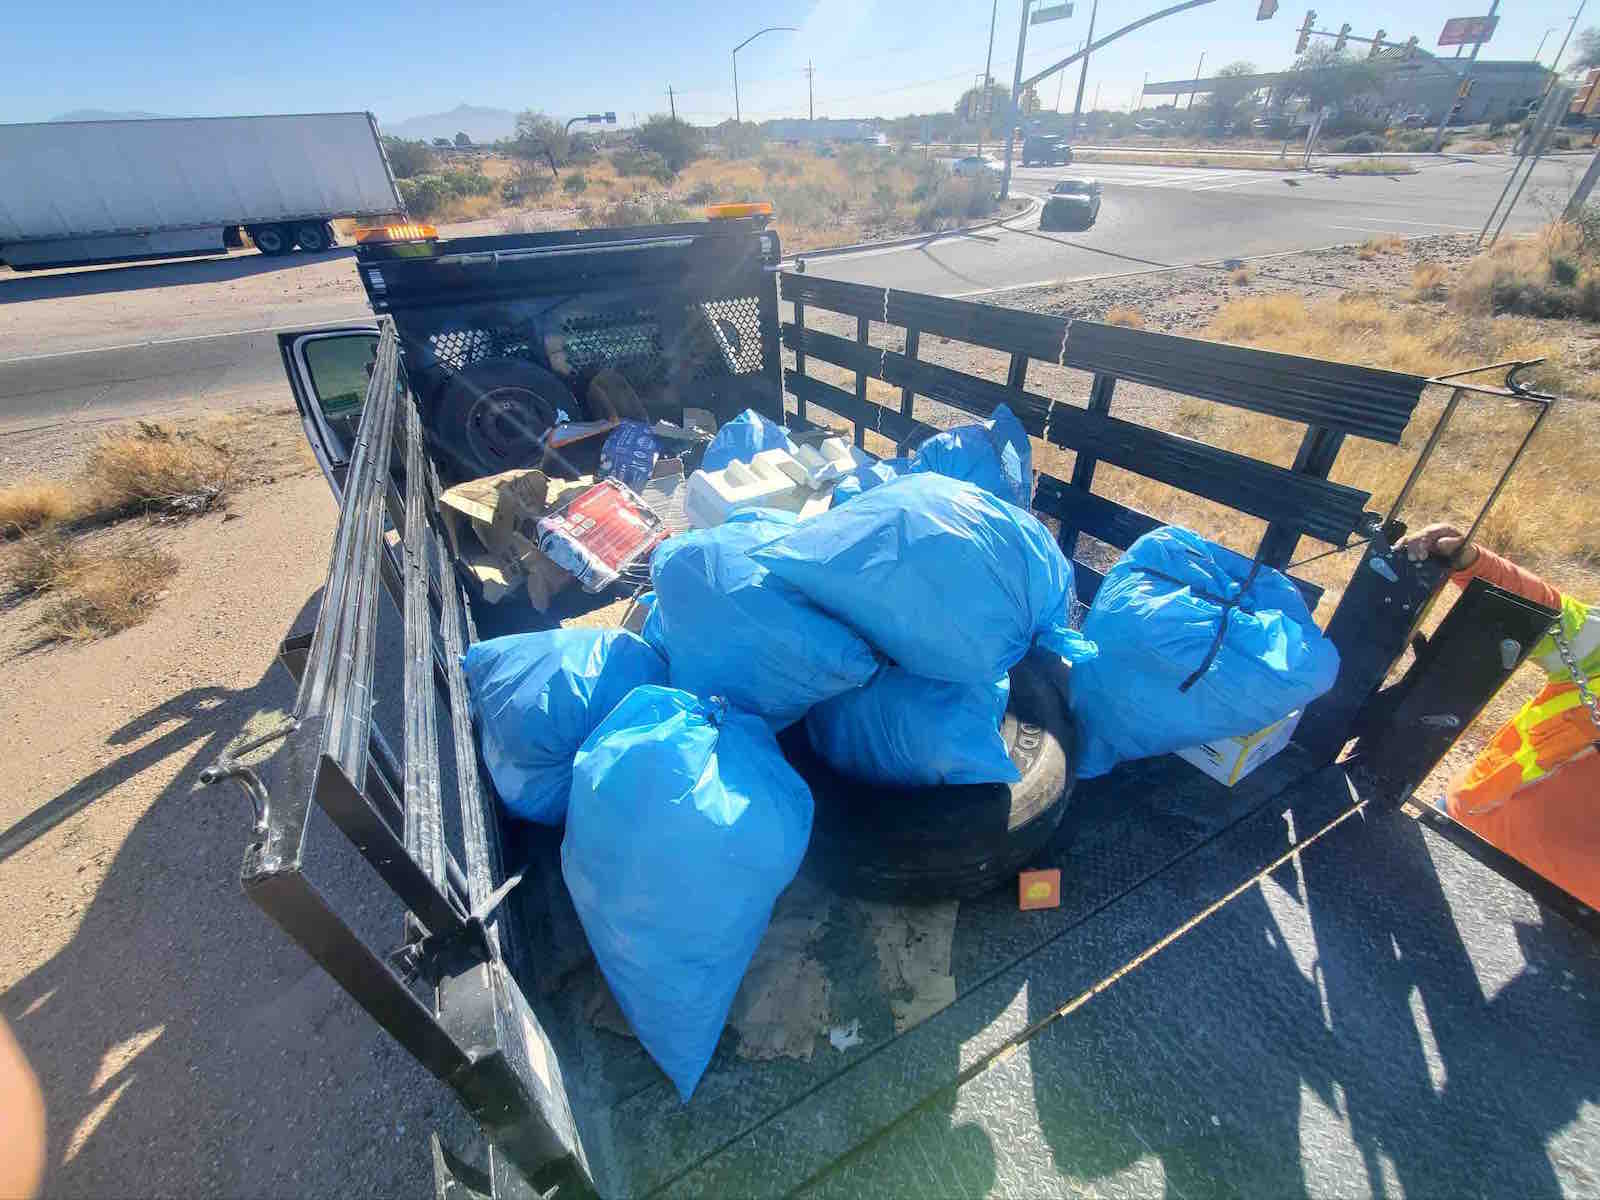 Bags of trash in a truck following the Tucson-area litter cleanup